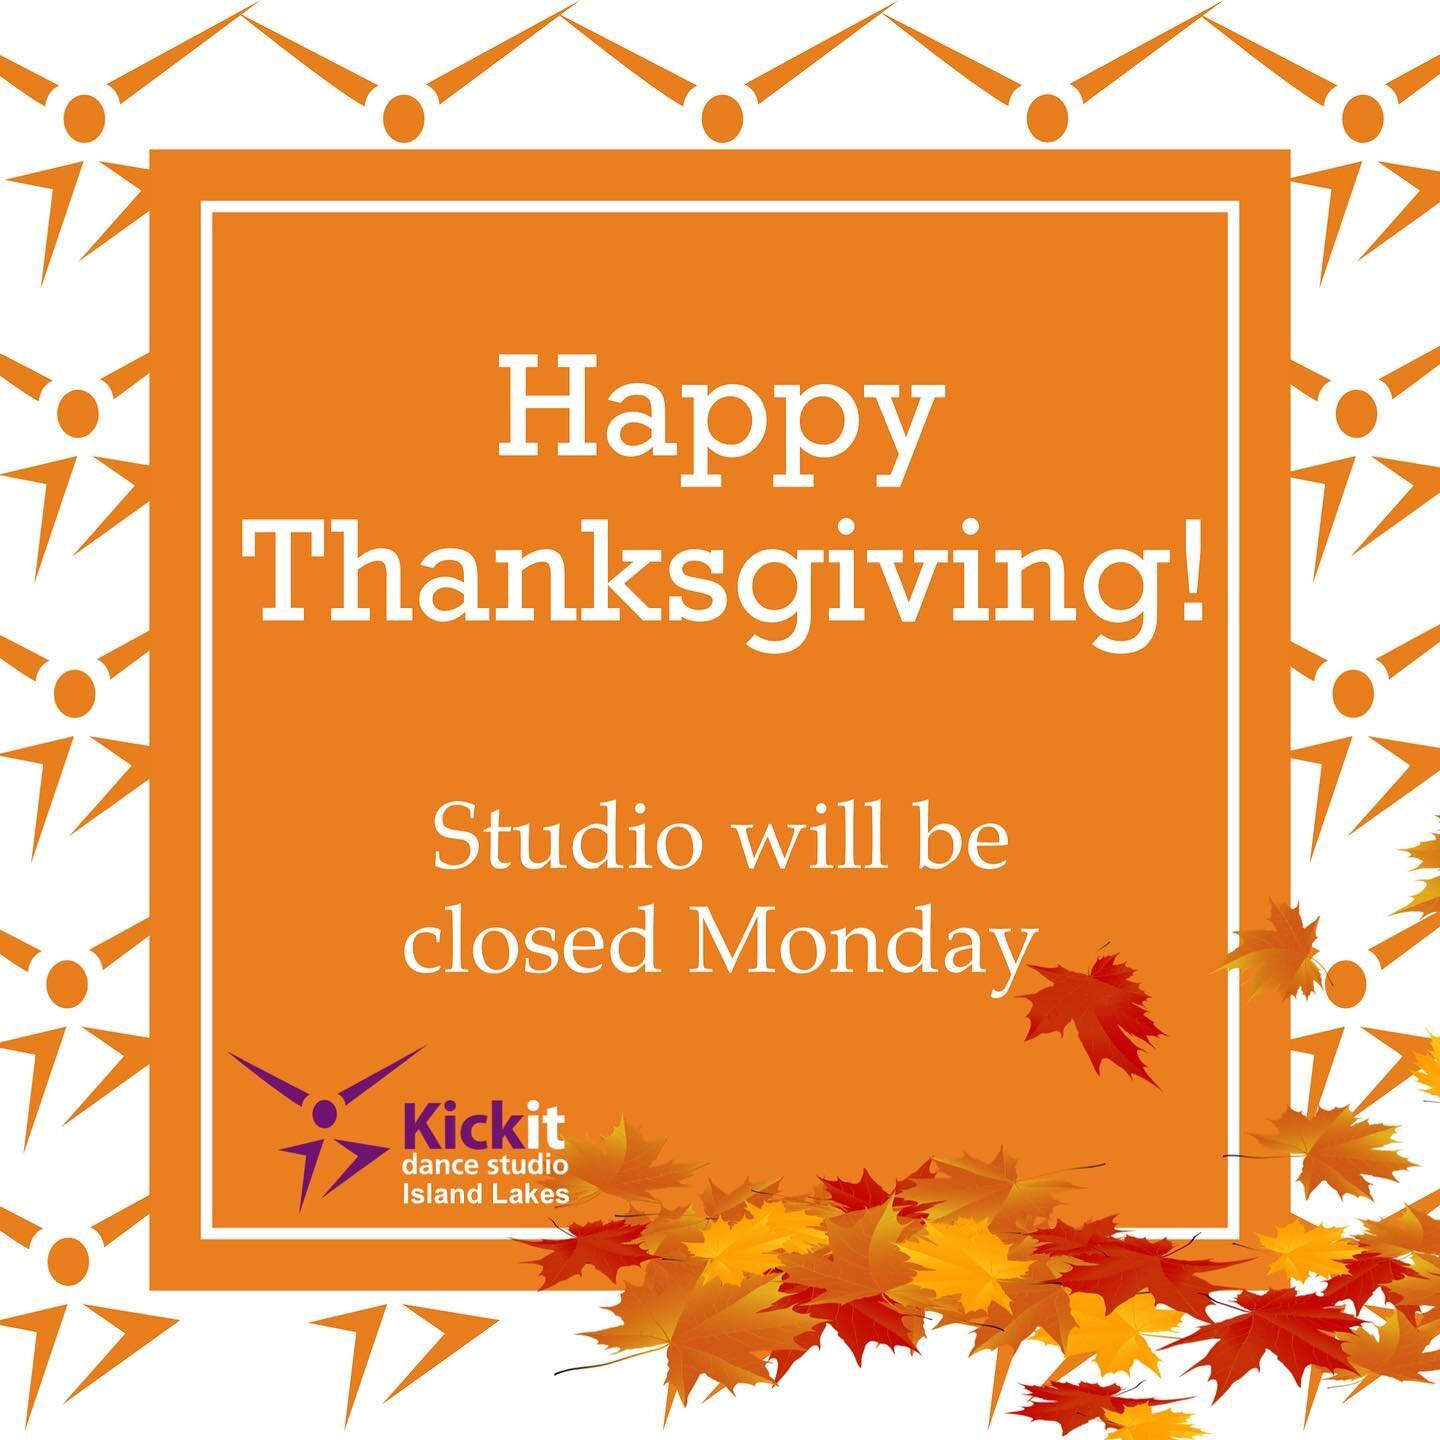 Happy Thanksgiving! 

Reminder: the studio will be closed Monday, October 9th